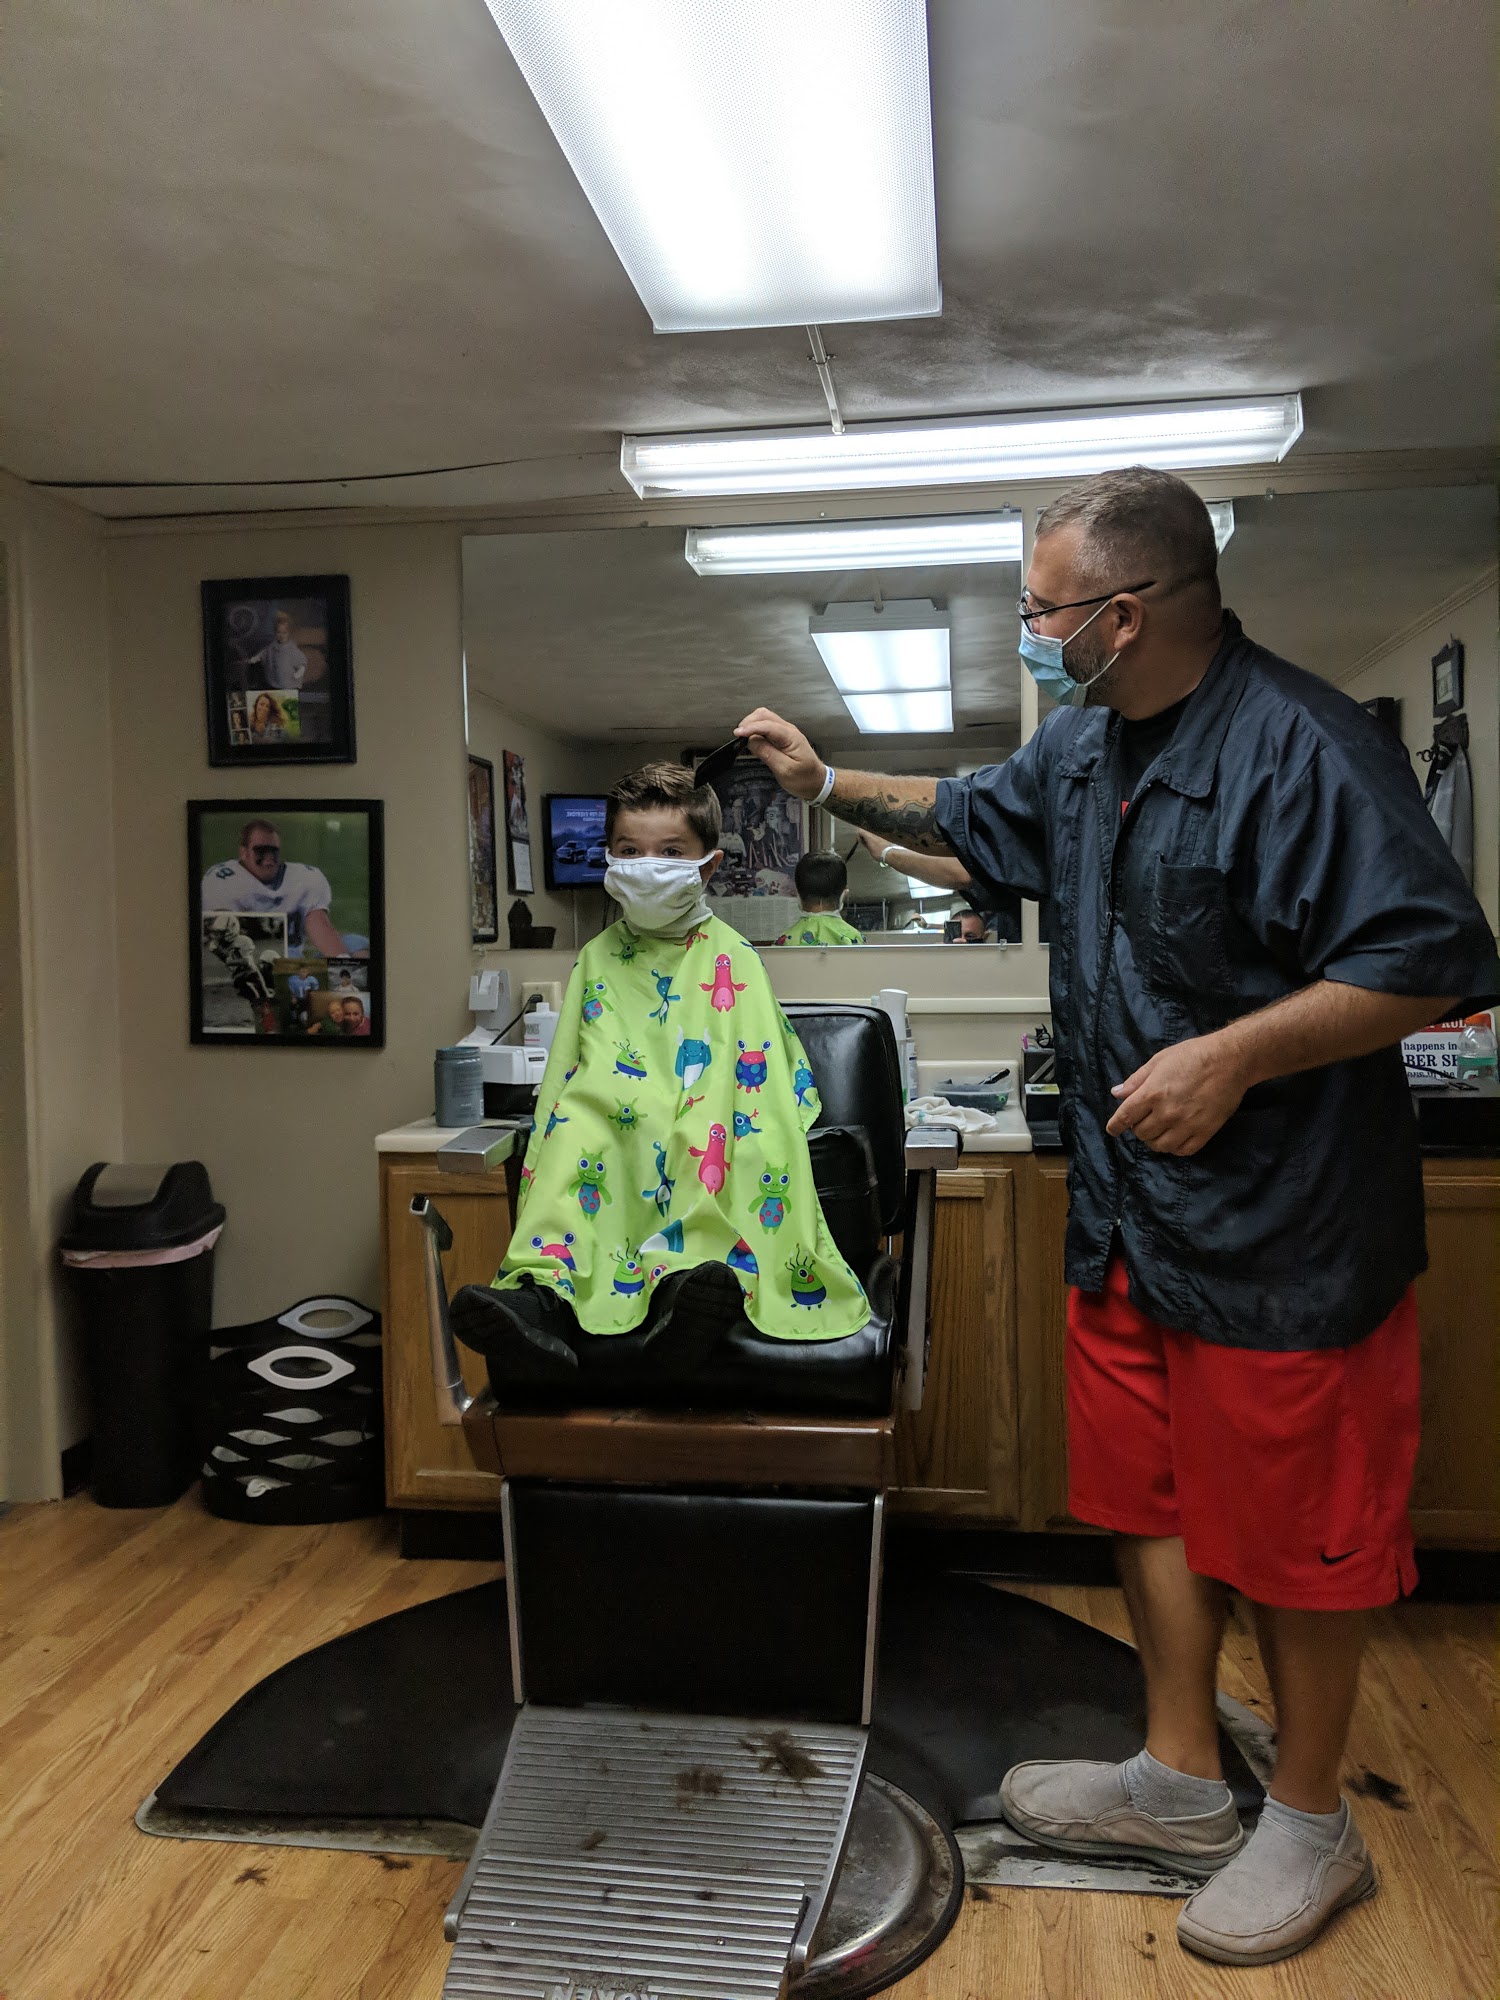 Chief's Barber Shop